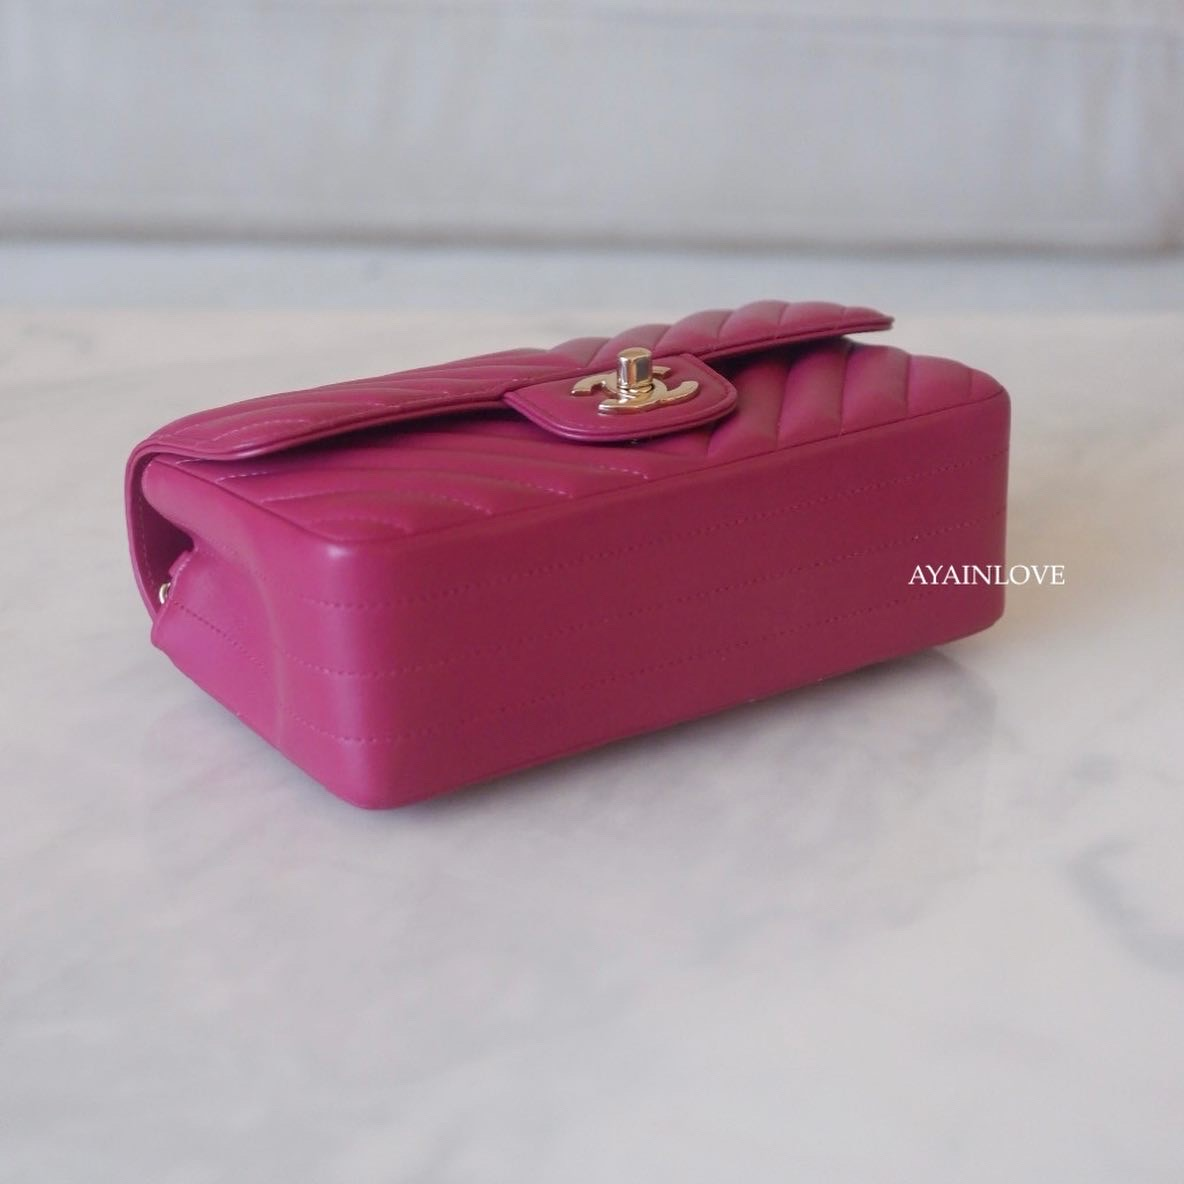 Chanel Raspberry Pink Mini Rectangular Bag With Brushed Gold